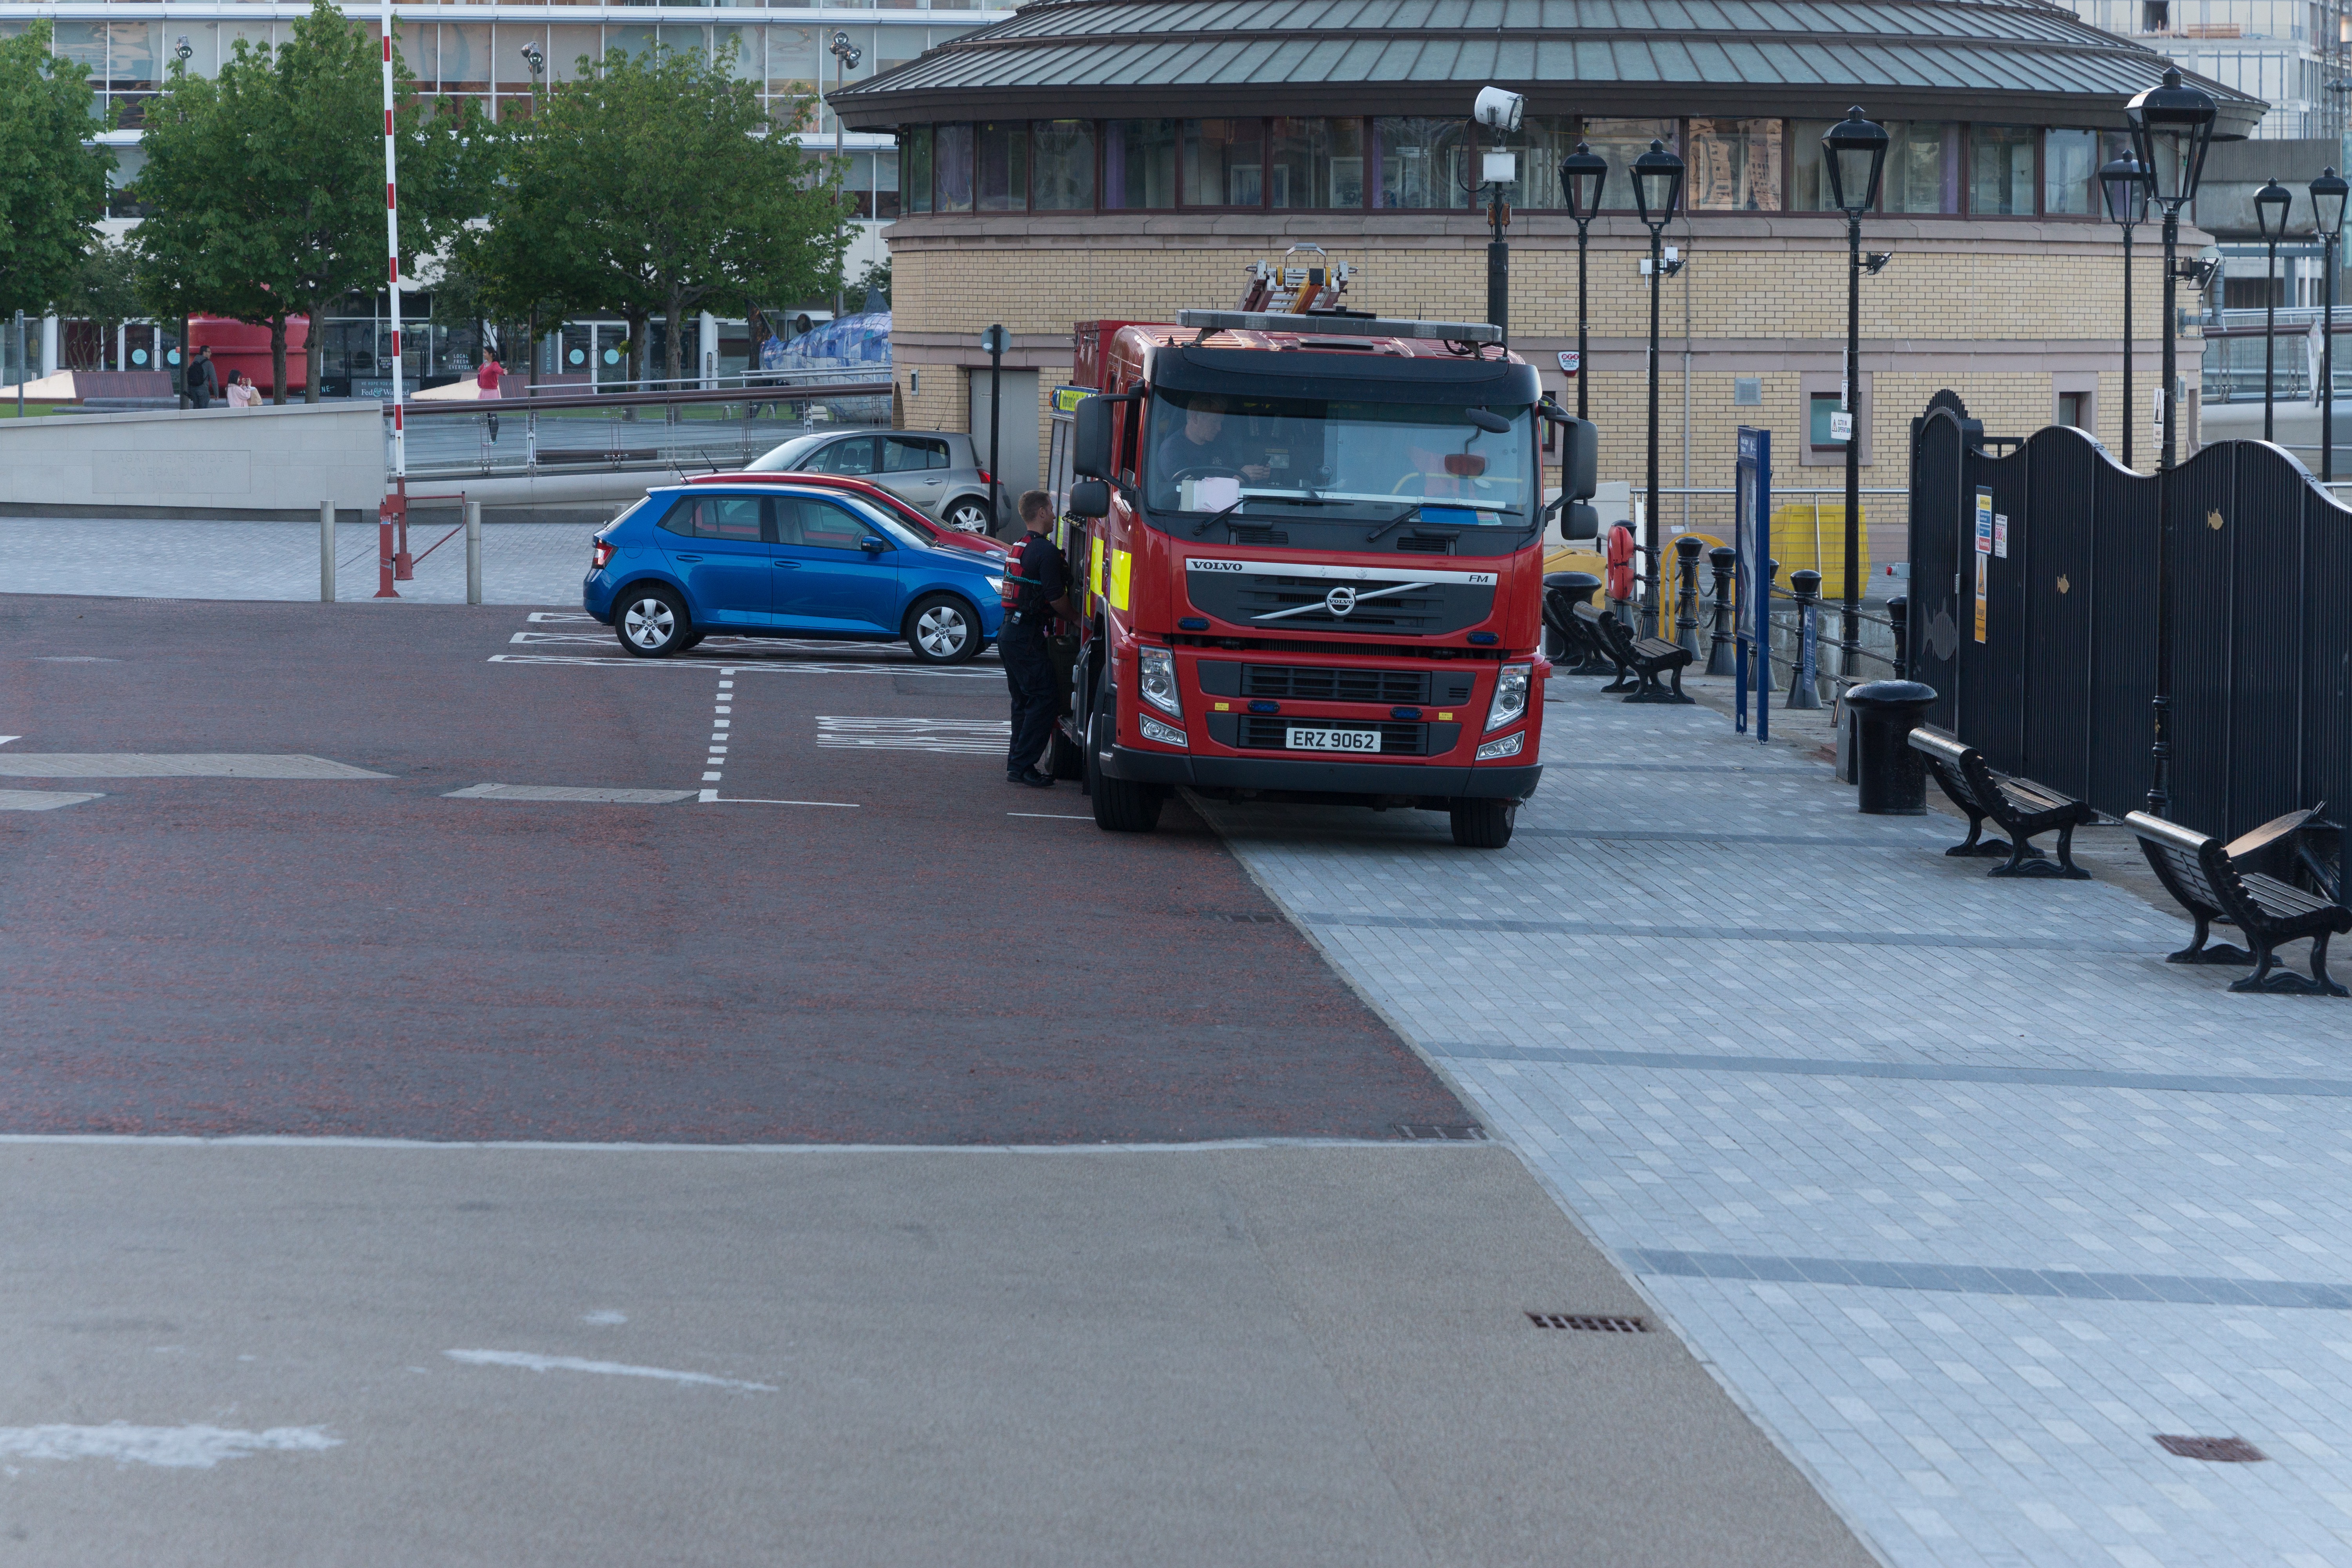 NORTHERN IRELAND FIRE AND RESCUE SERVICE IN BELFAST  001